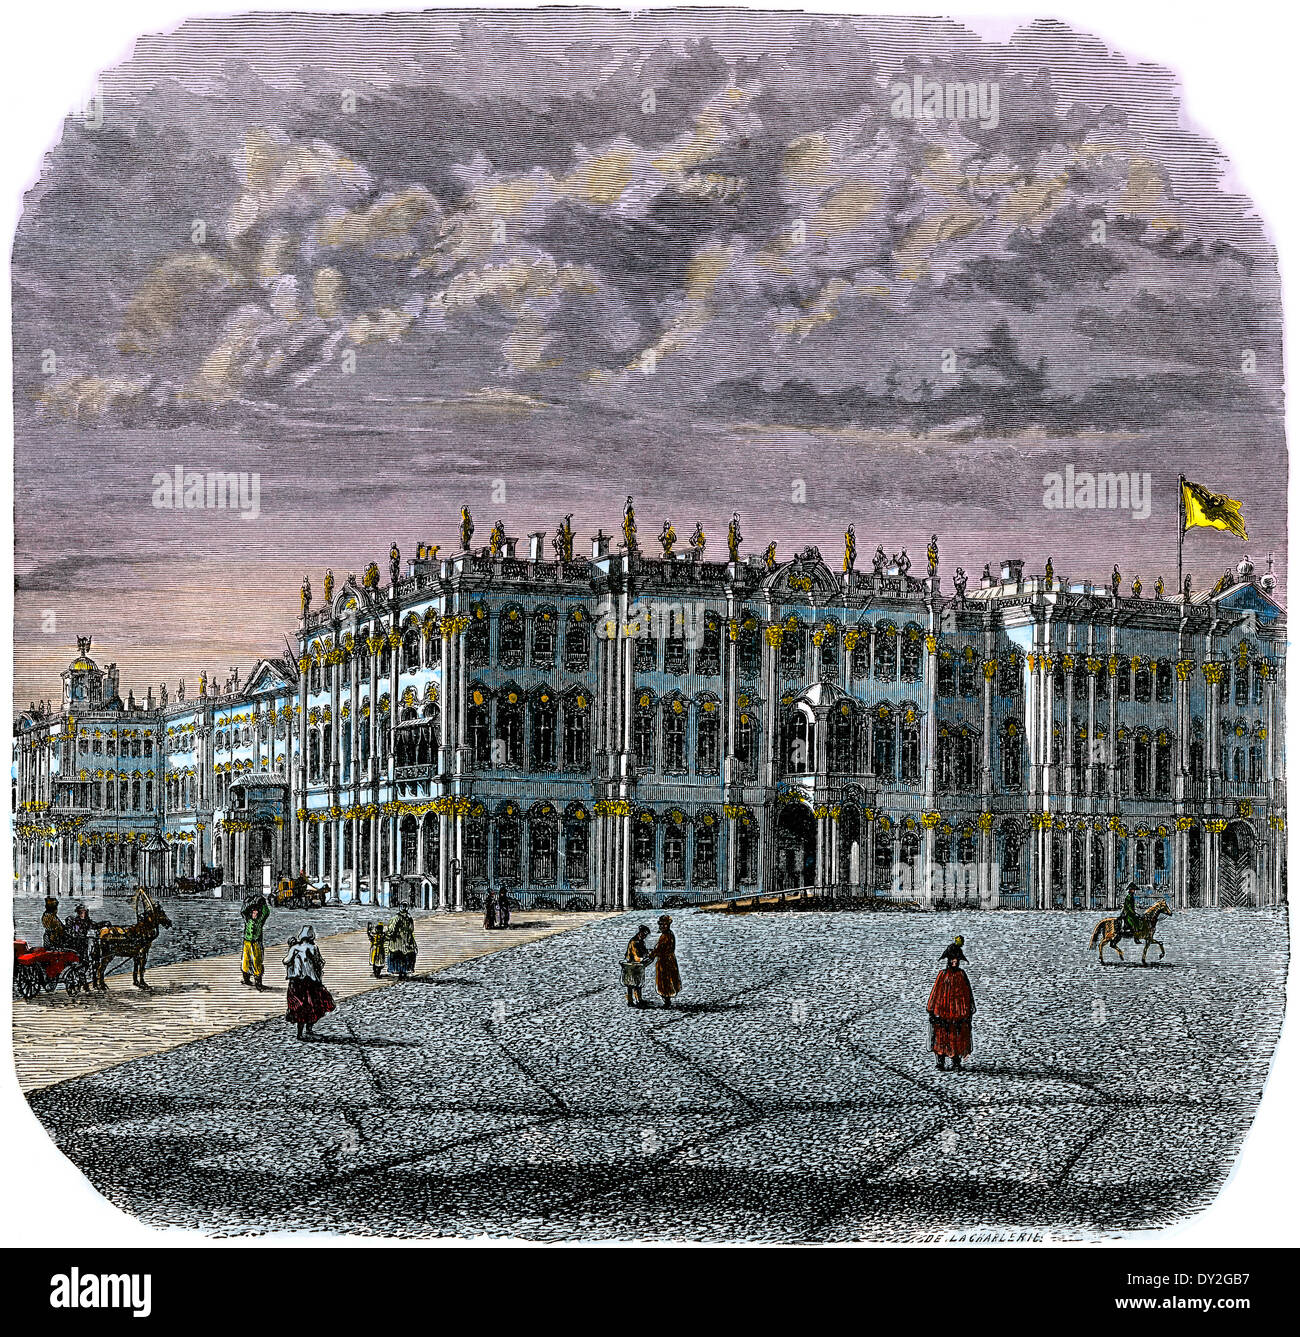 The Winter Palace, St Petersburg, Russia, 1880s. Hand-colored woodcut Stock Photo